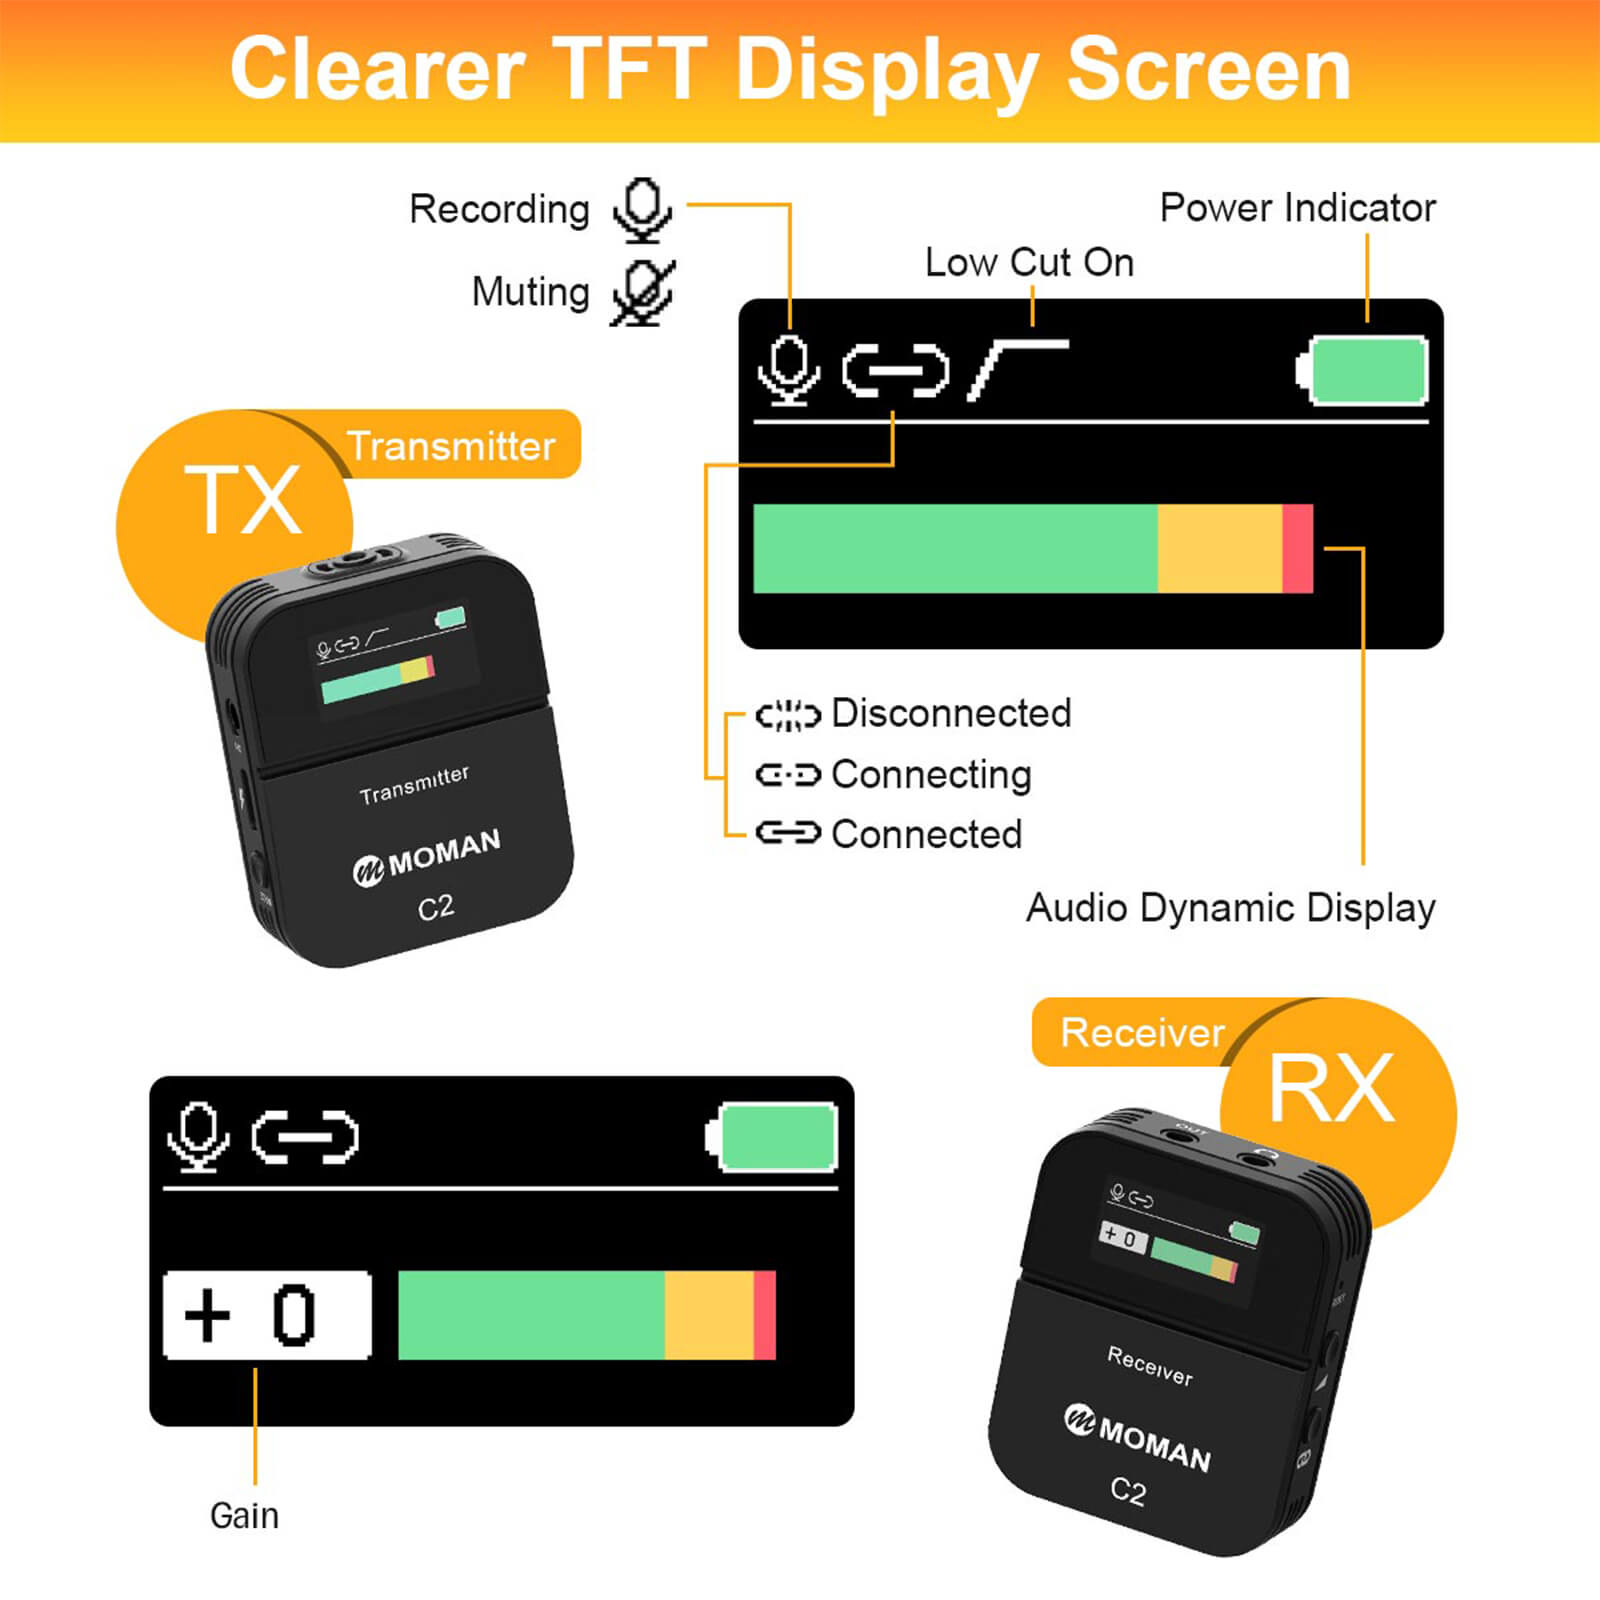 Moman C2 and C2Xwith clearer TFT display screen which shows situations of mic, low cut, audio dynamic display, and power.